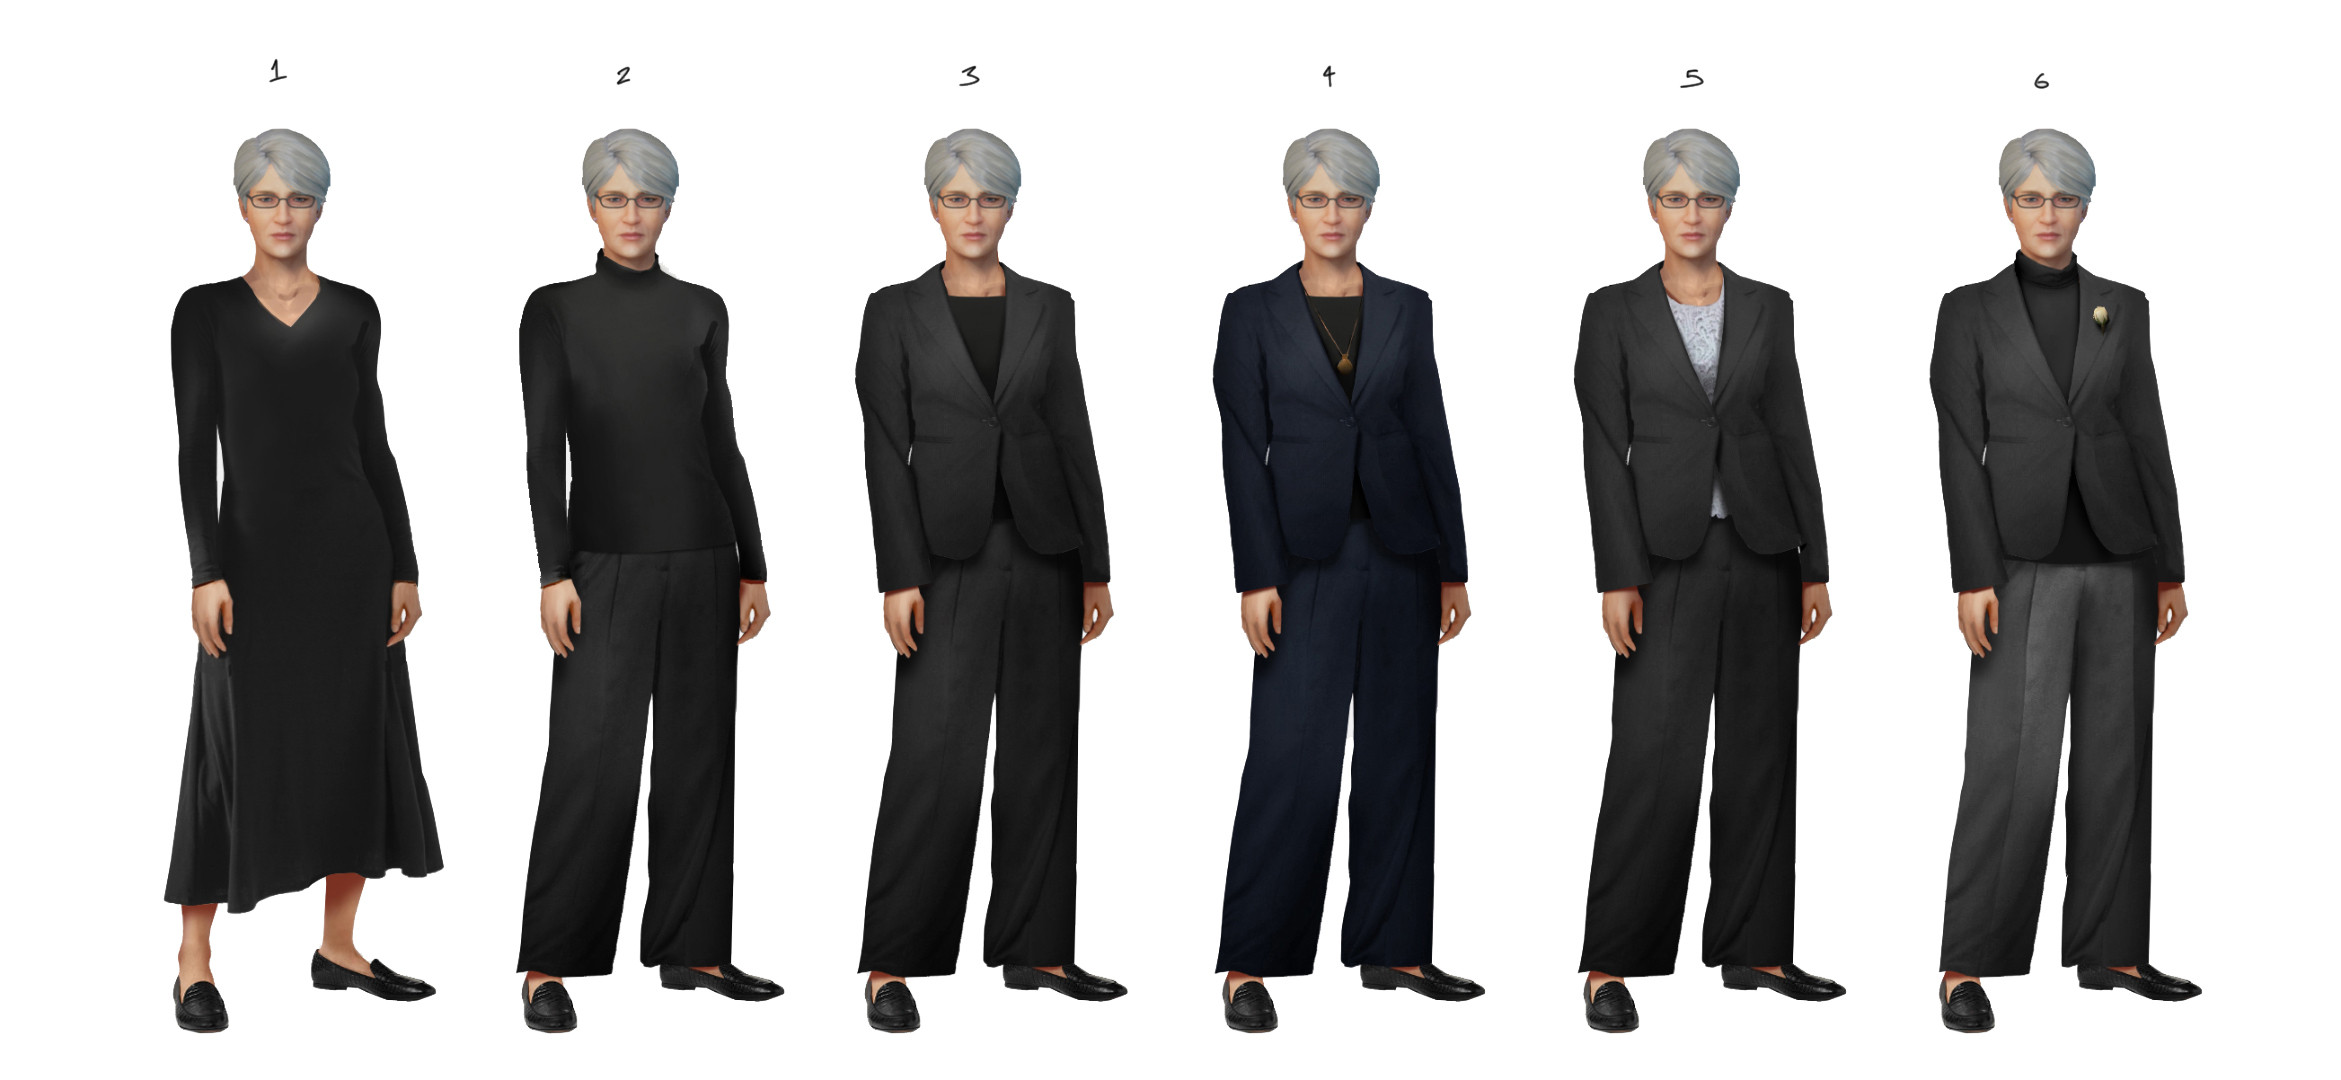 Chapter 2 - Eleanor Wake Outfit Options